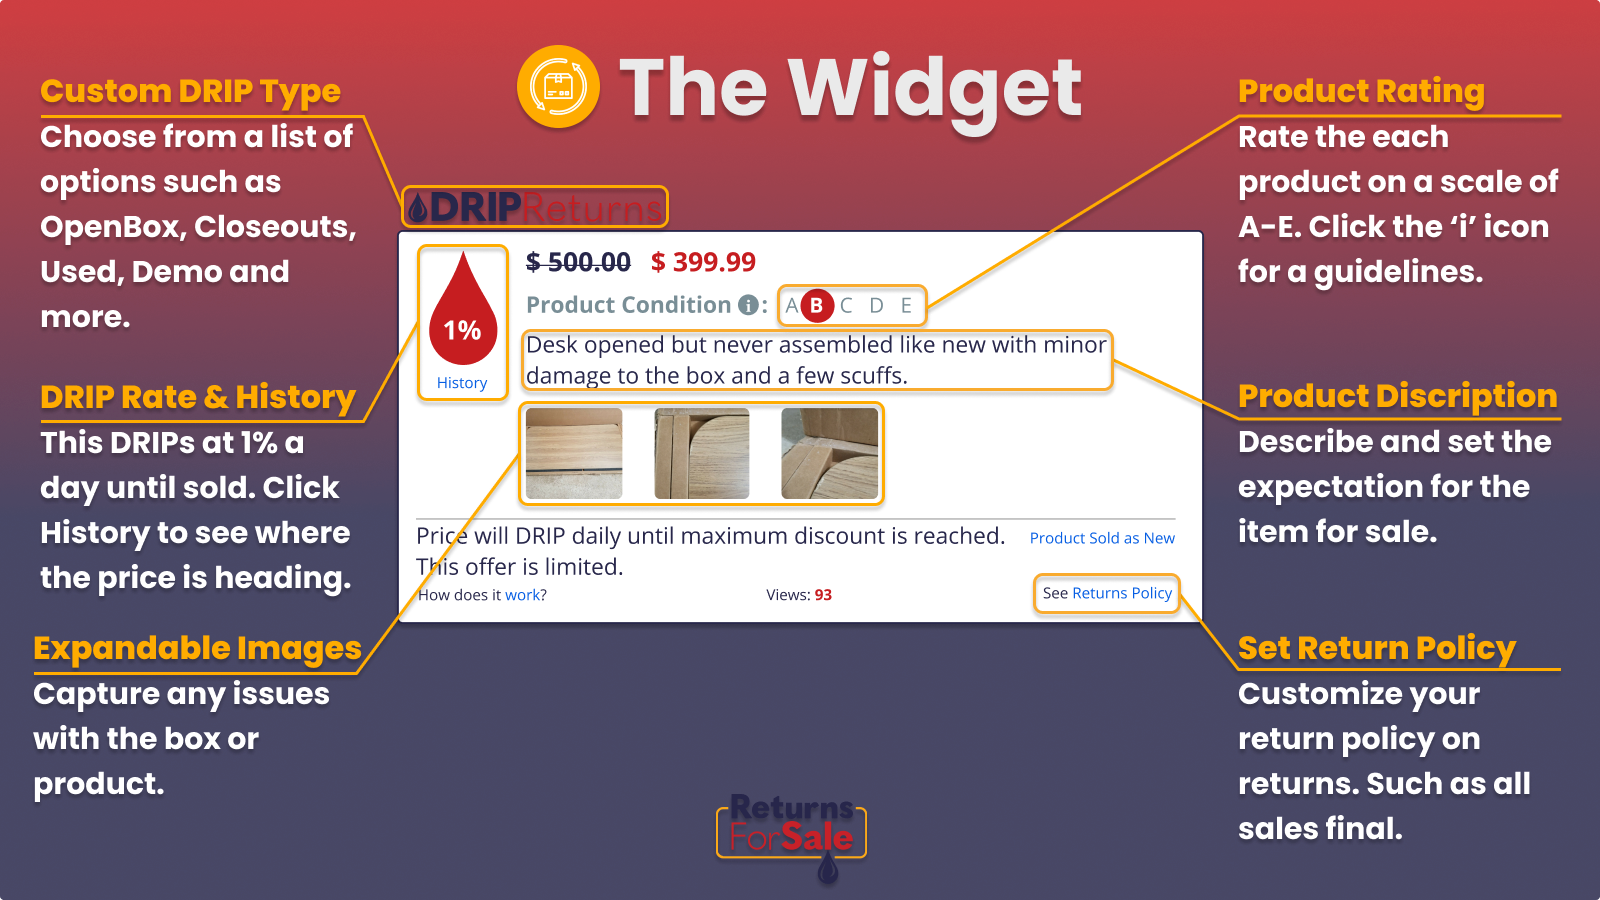 Widget details exactly what the customer is to expect.